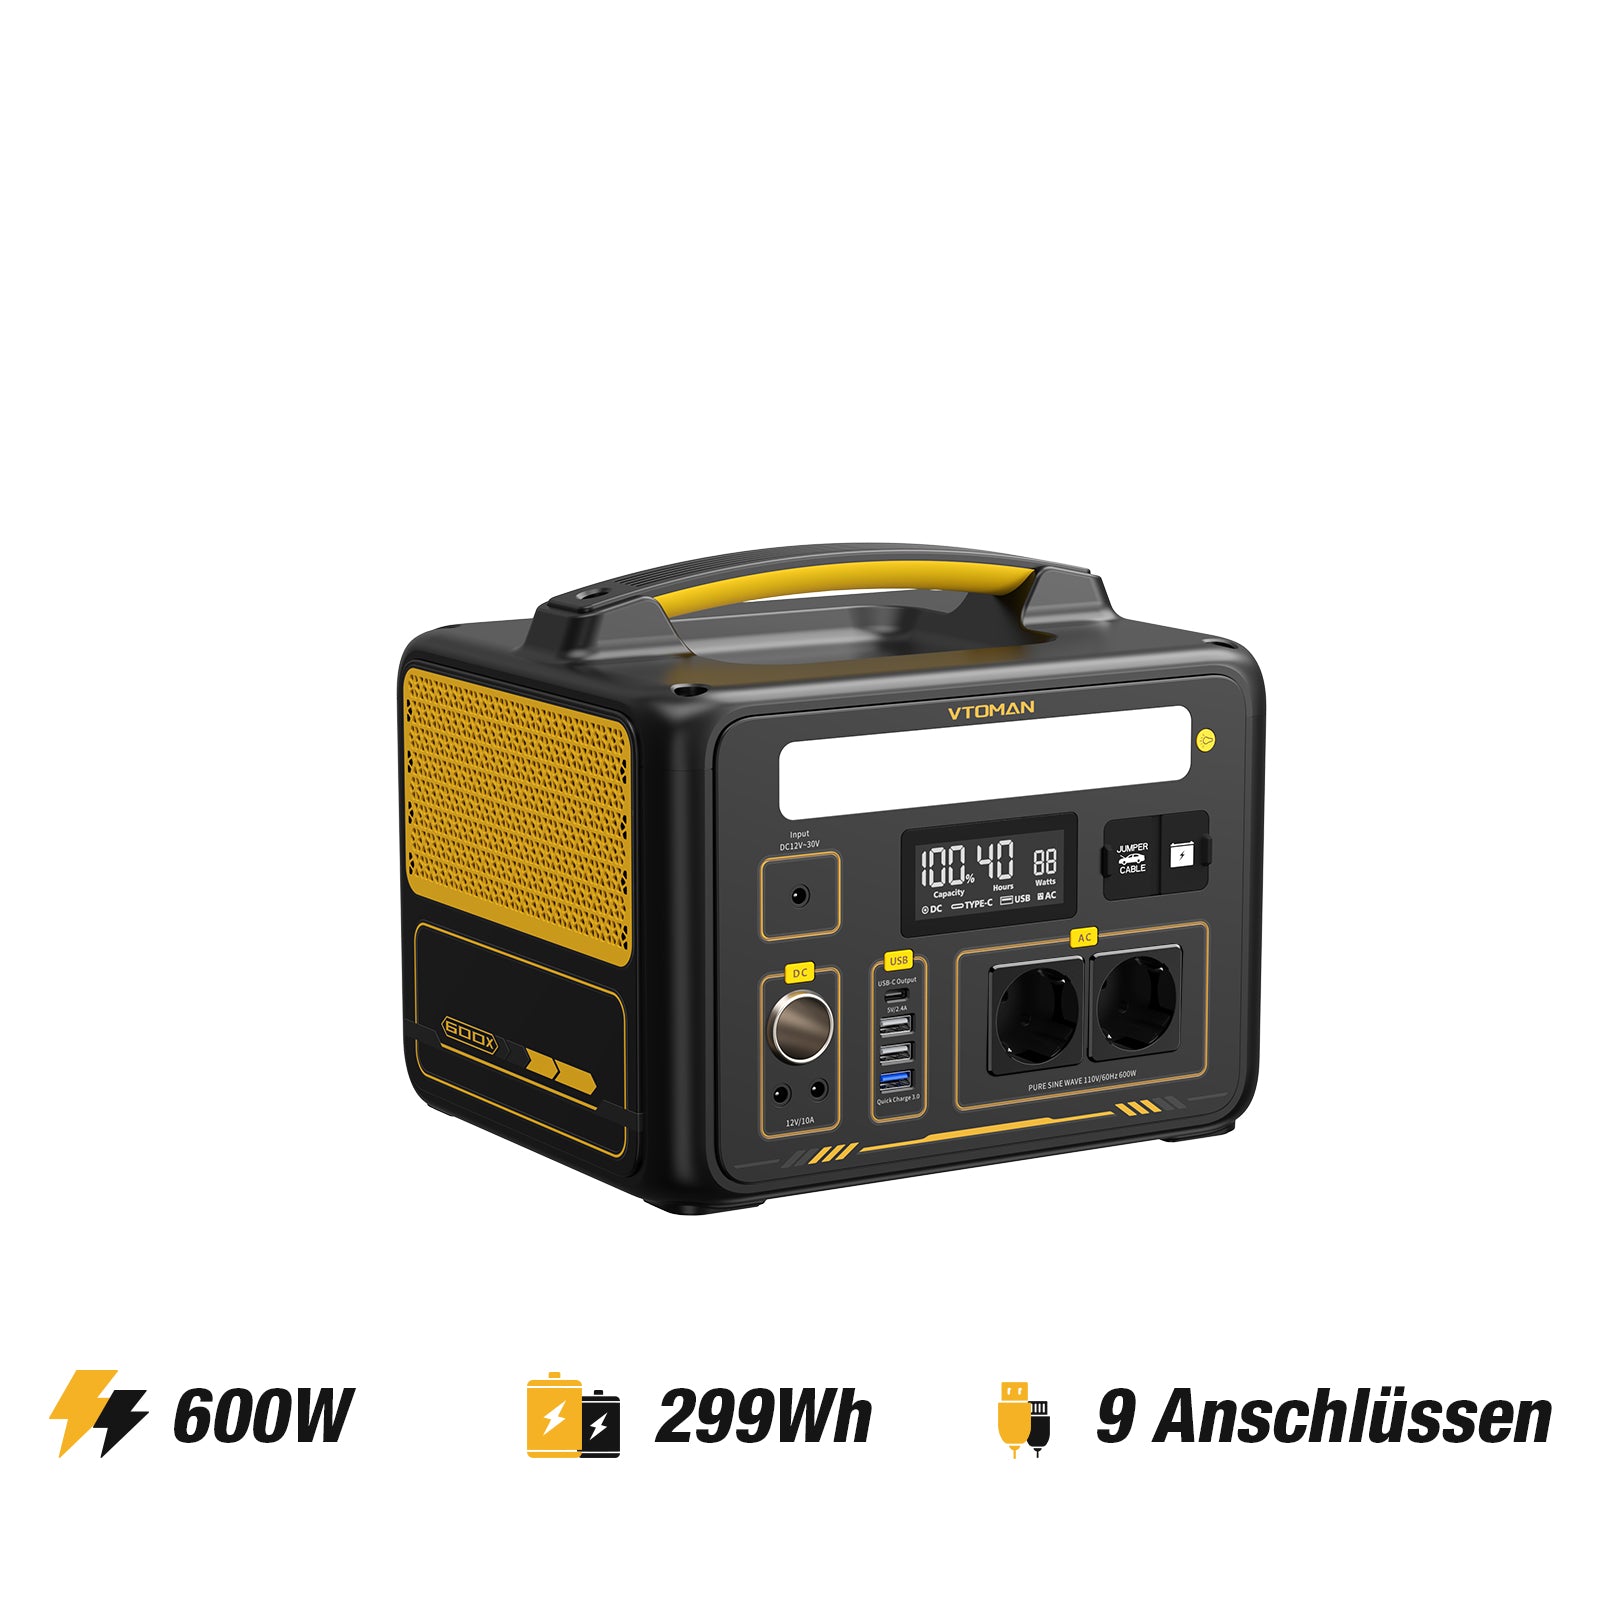 Jump 600W/299Wh 110W Solargenerator